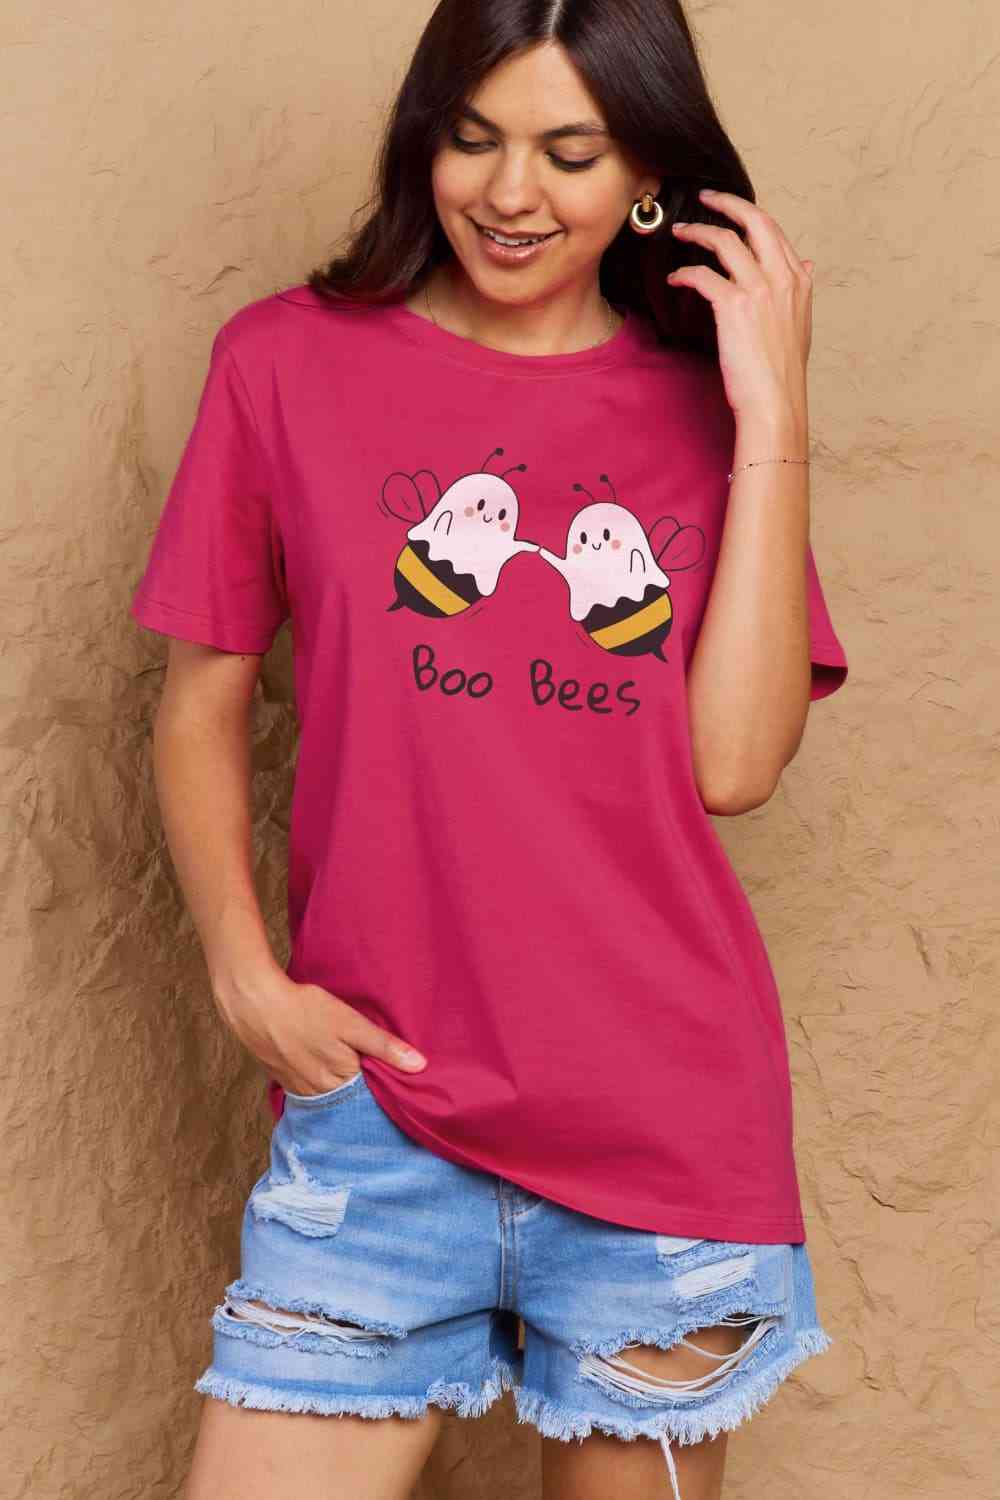 BOO BEES Graphic Cotton T-Shirt - Red / S - T-Shirts - Shirts & Tops - 13 - 2024